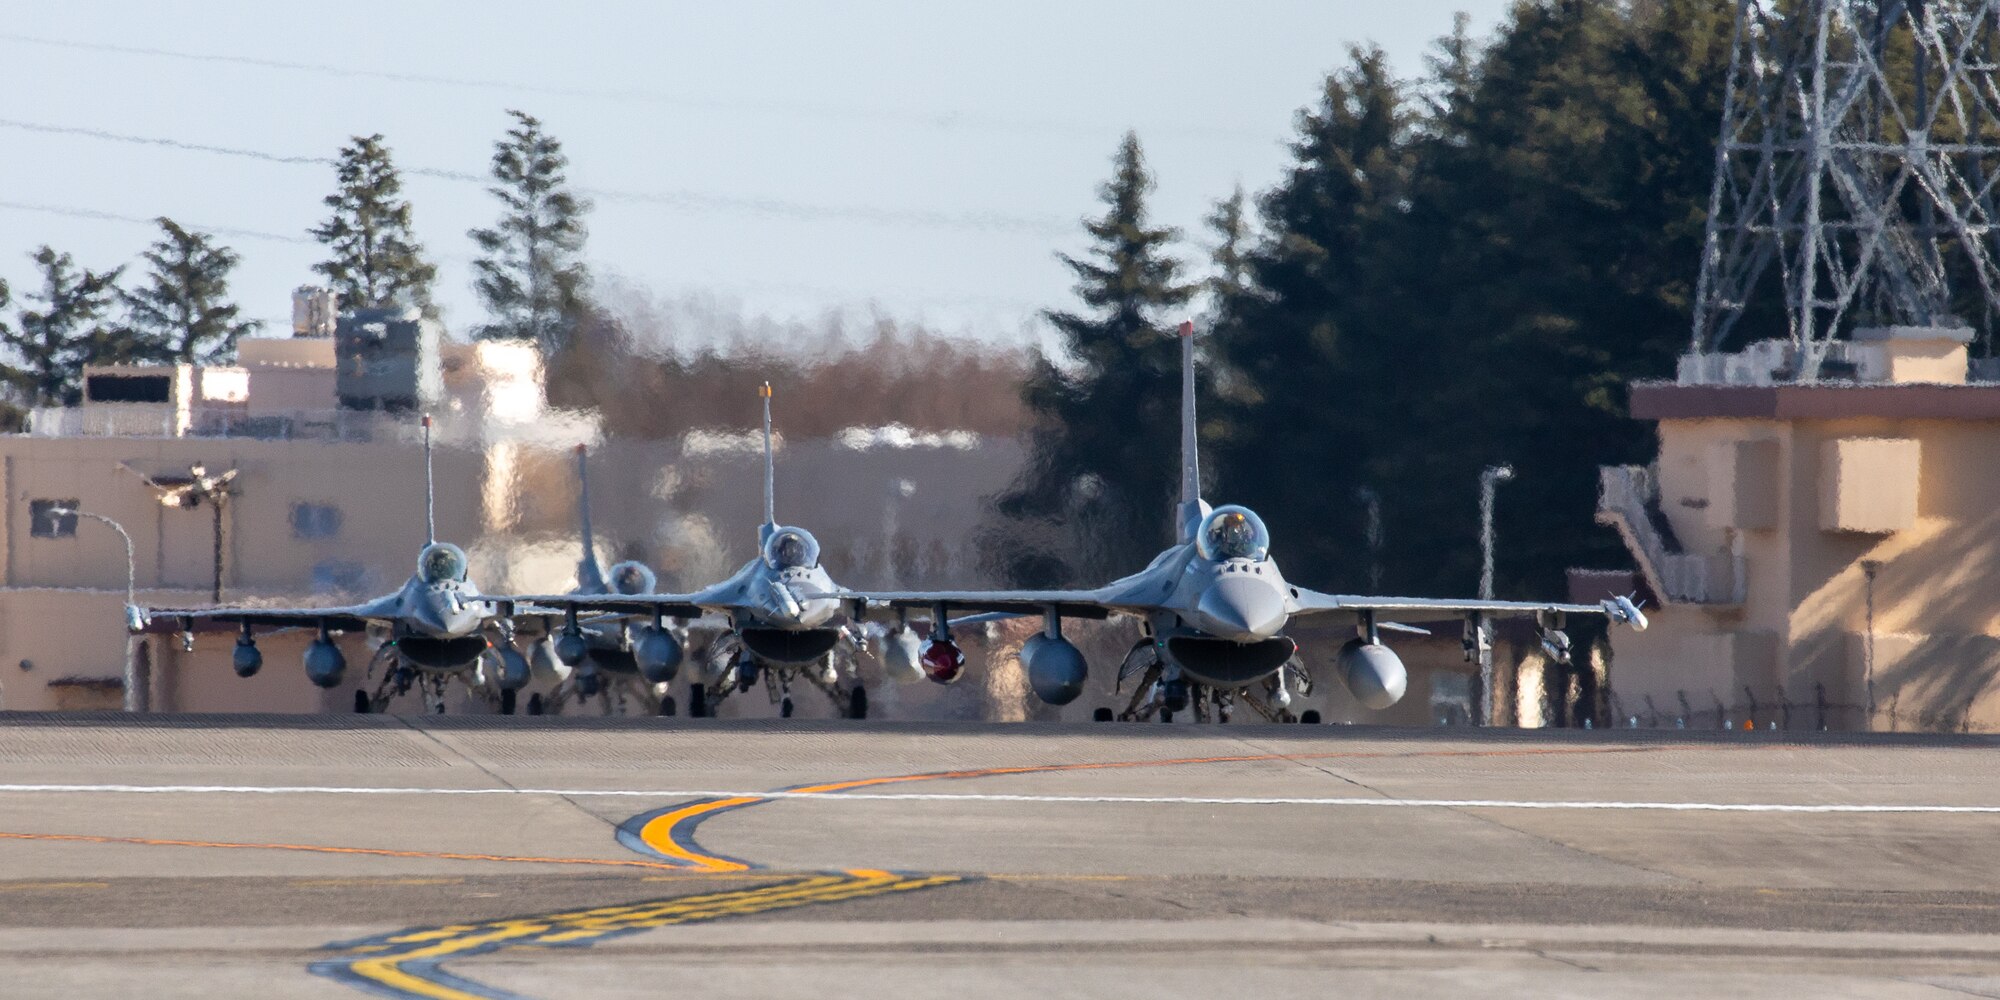 Three F-16s taxi up the flightline in a row. The heat from their engines creates blur in the air.